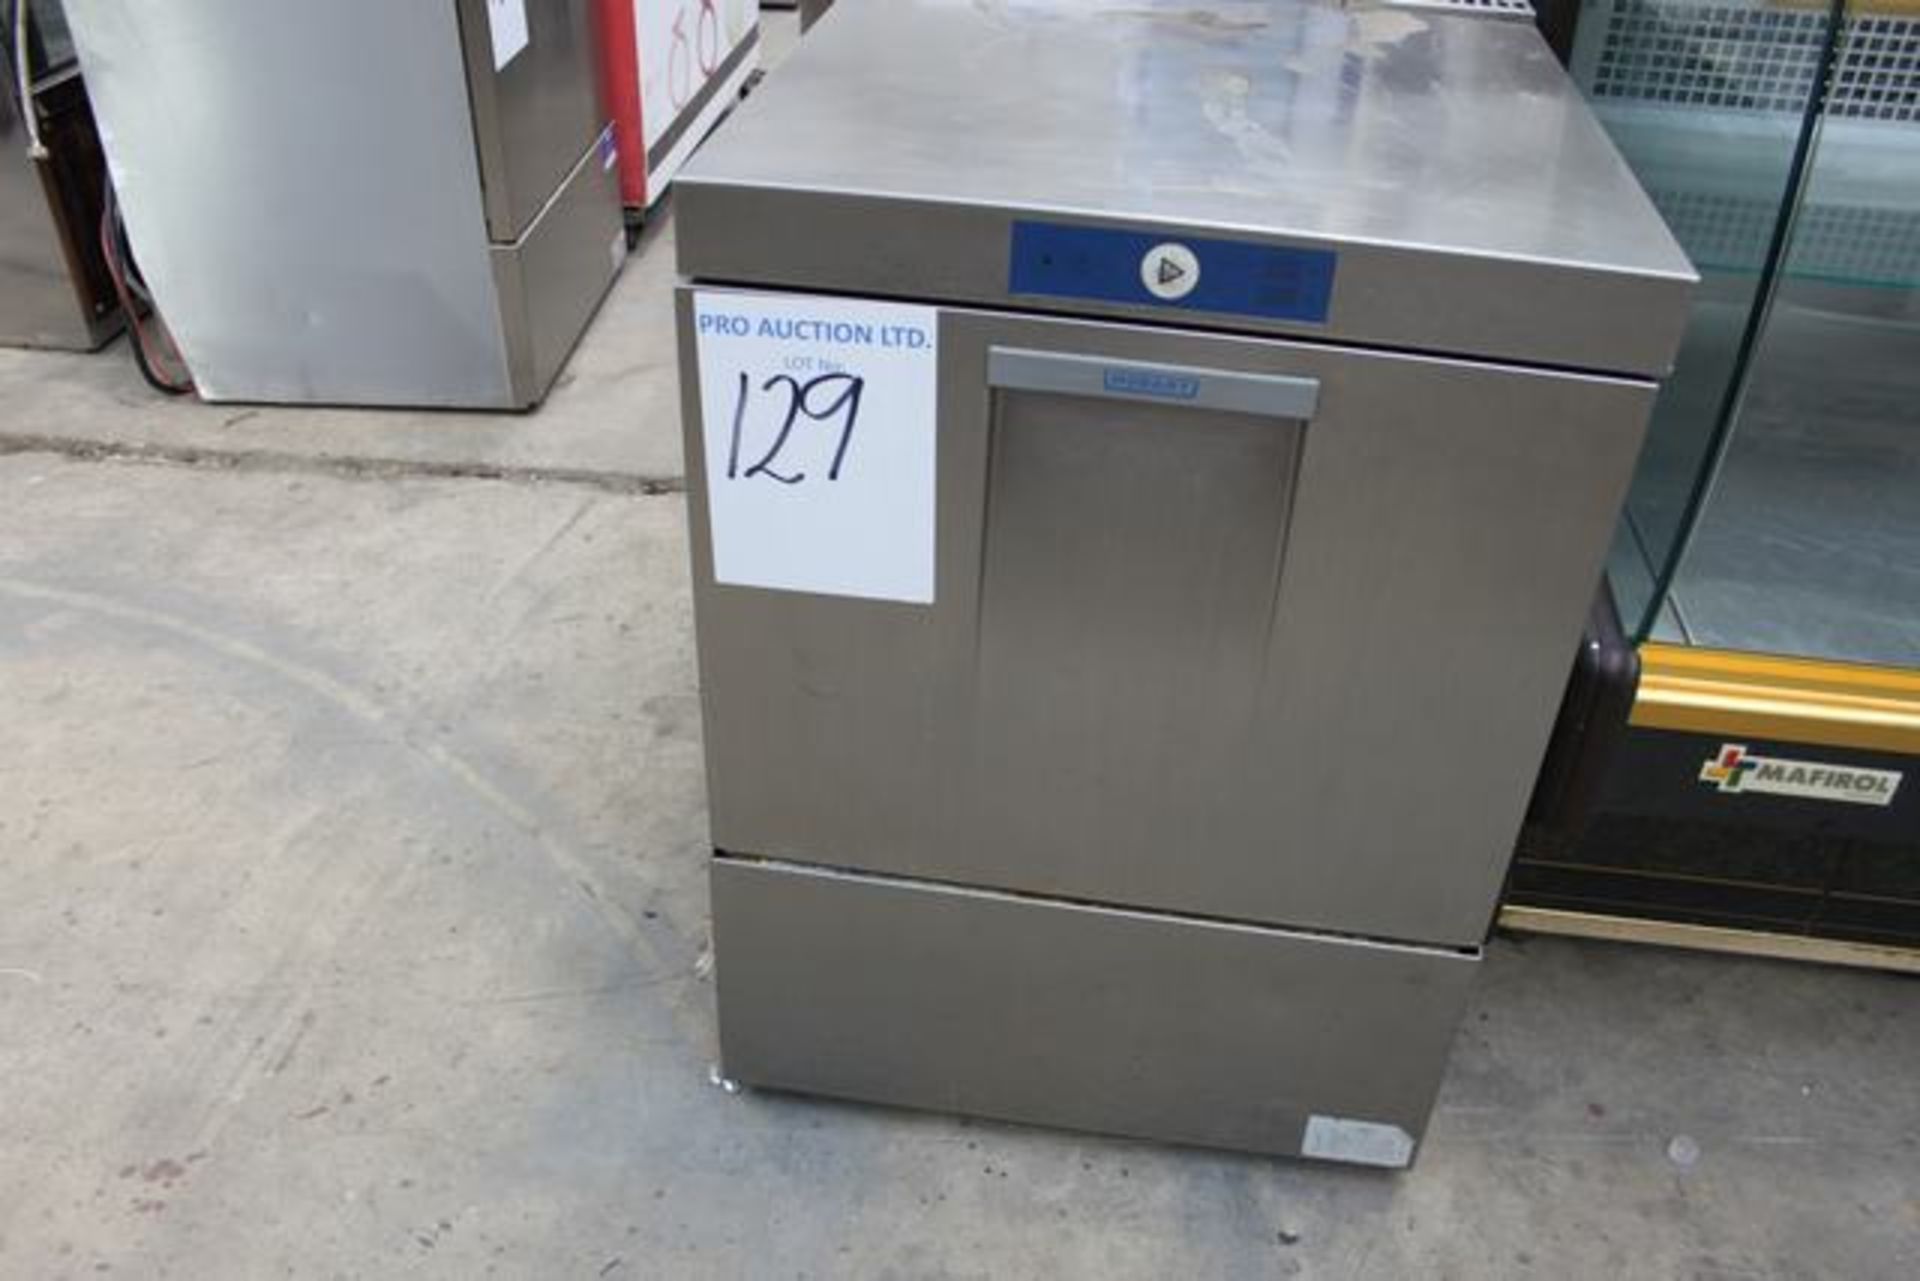 Hobart FXS -70N under counter dishwasher 20 racks per hour variable cycle times of 180, 240 or 300